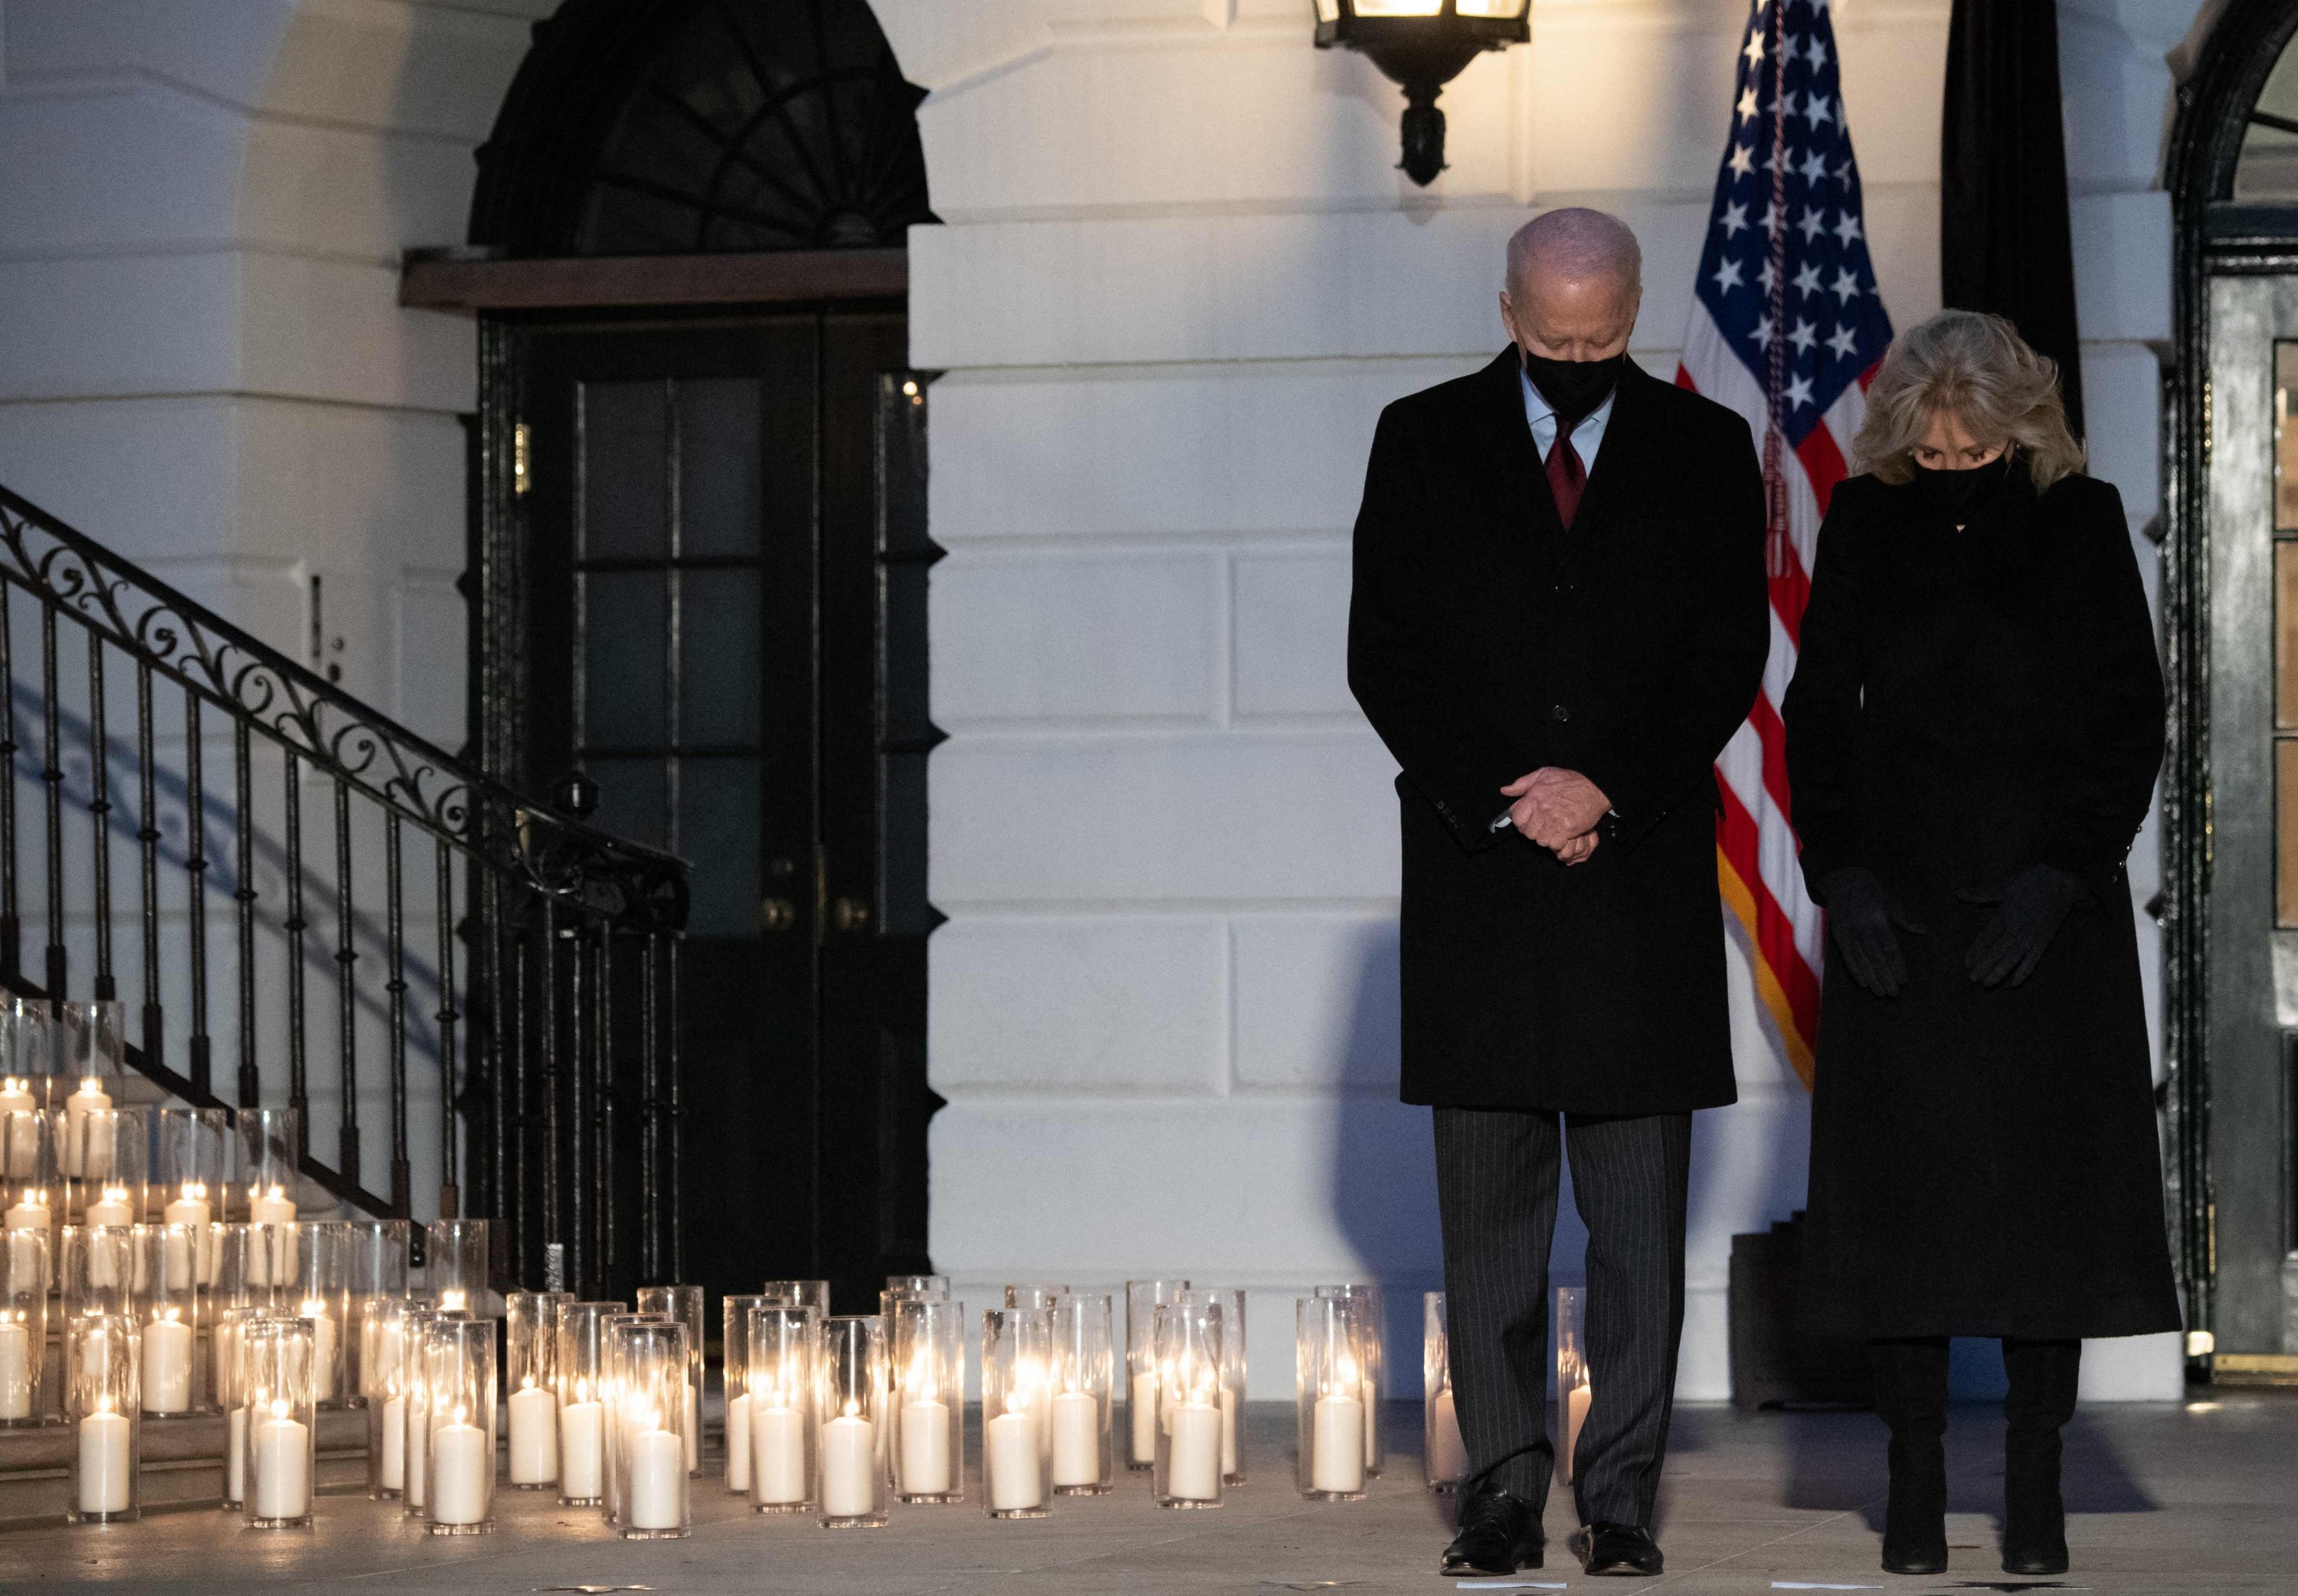 U.S. President Joe Biden (L) and first lady Jill Biden hold a moment of silence during a candlelight ceremony in honor of those who lost their lives to the coronavirus on the South Lawn of the White House in Washington, D.C., Feb. 22, 2021. (Photo by SAUL LOEB / AFP)